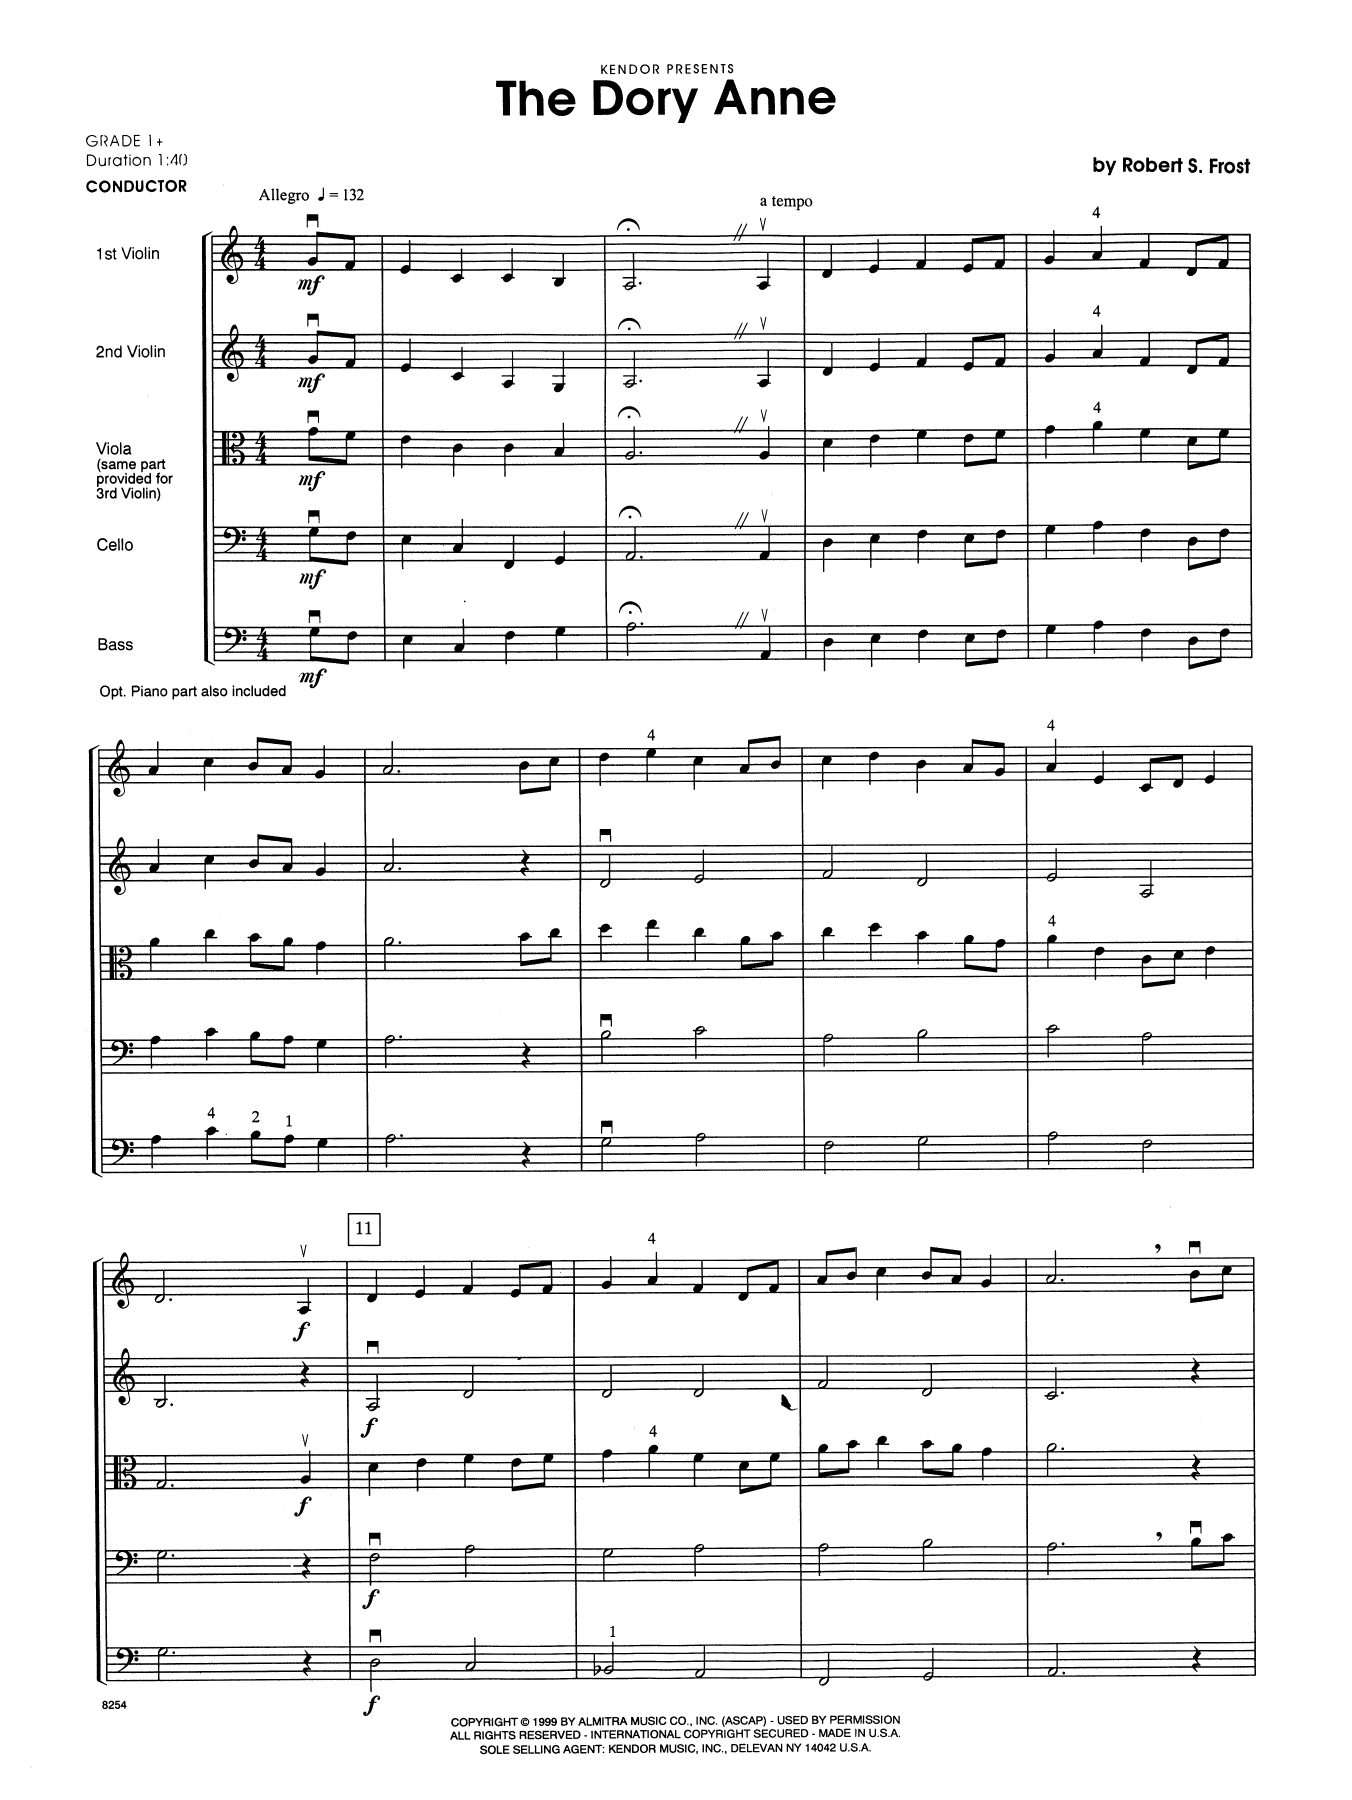 Download Robert S. Frost The Dory Anne - Full Score Sheet Music